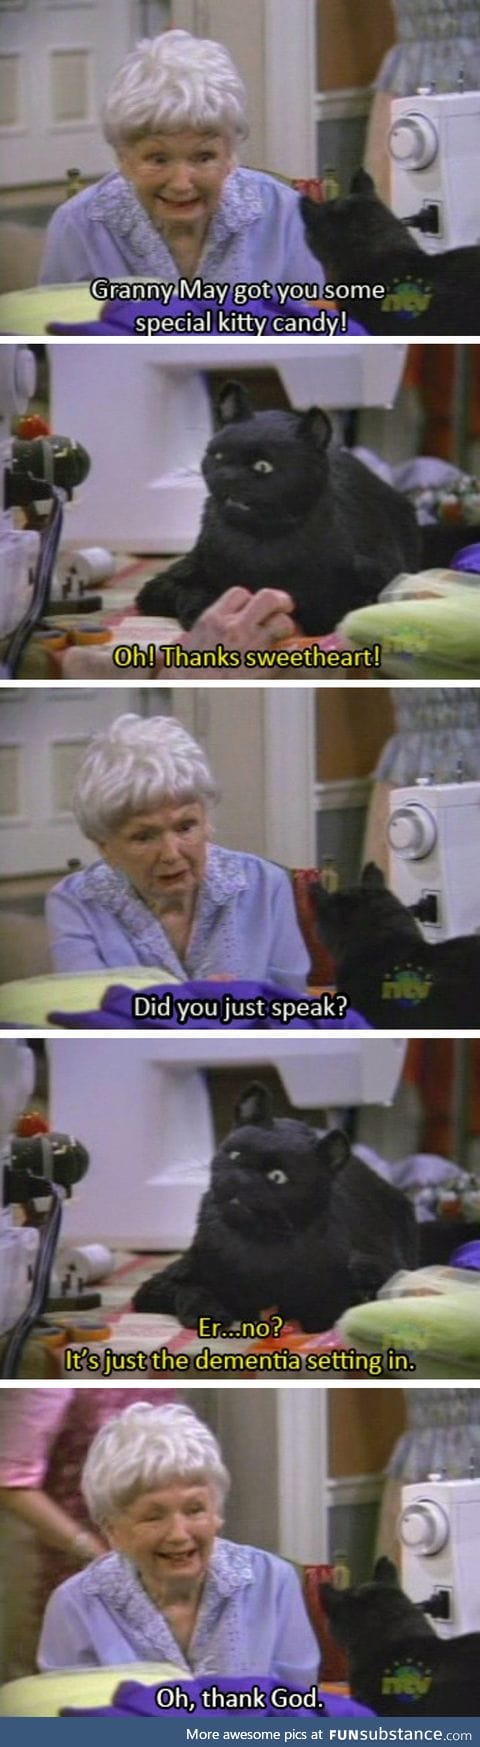 Salem from Sabrina the Teenage Witch had no chill